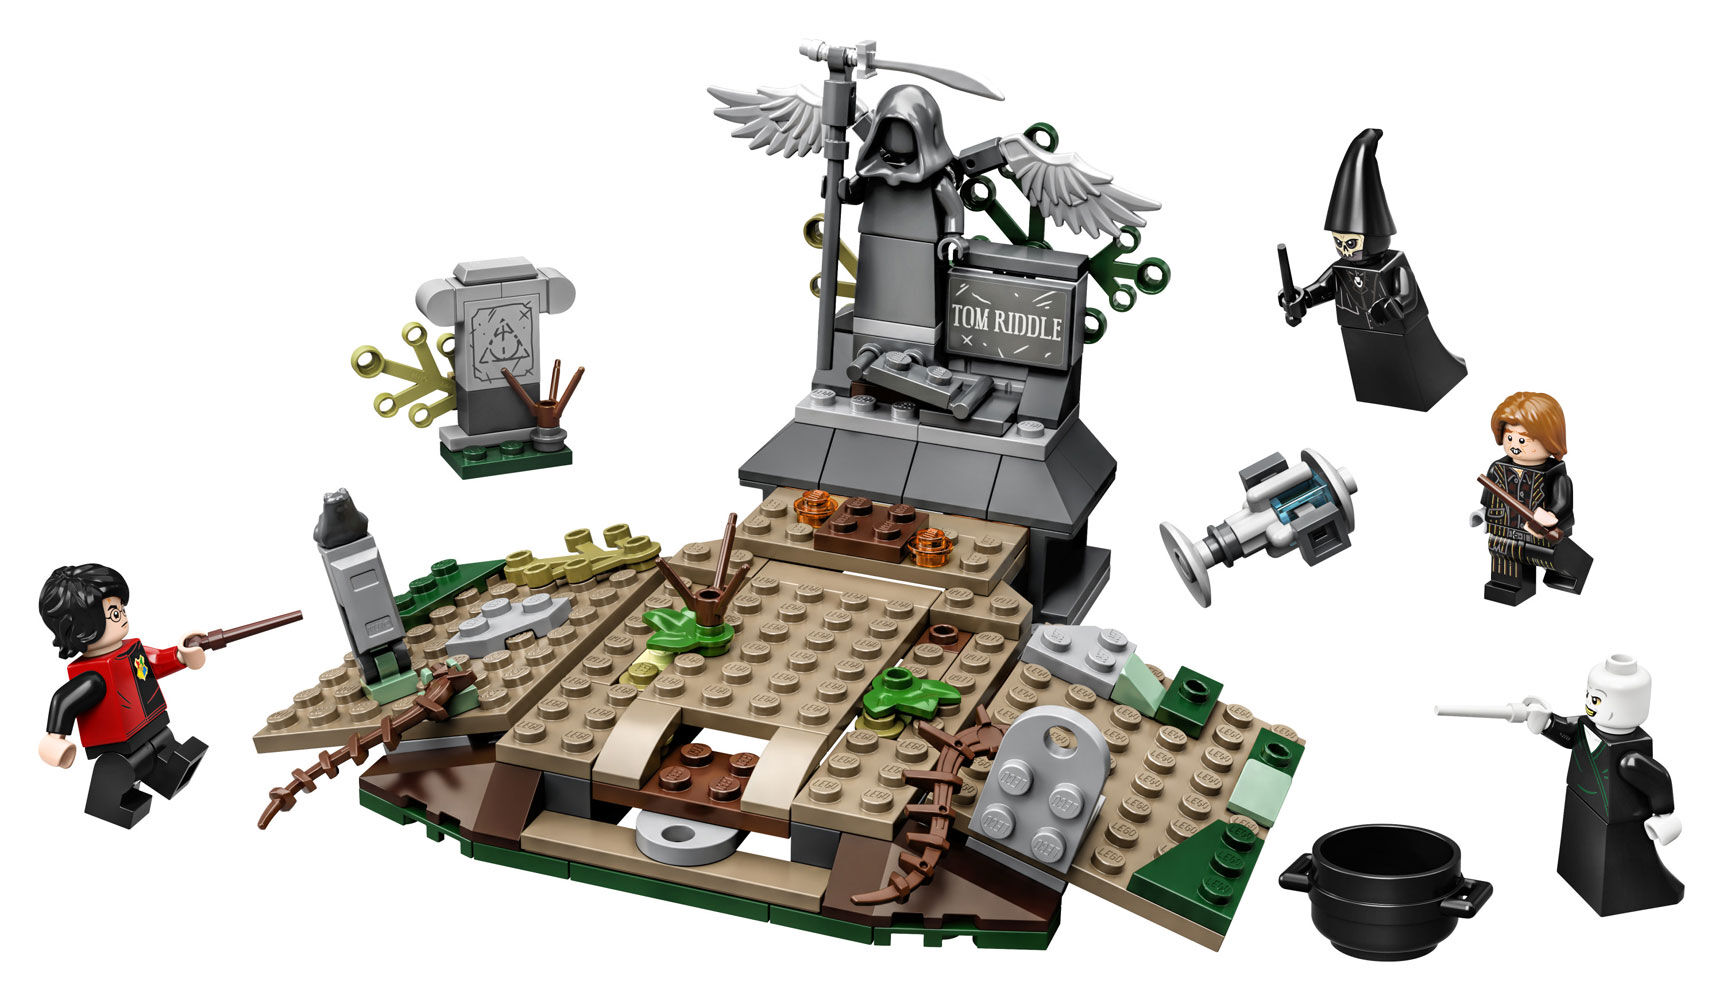 harry potter lego clearance